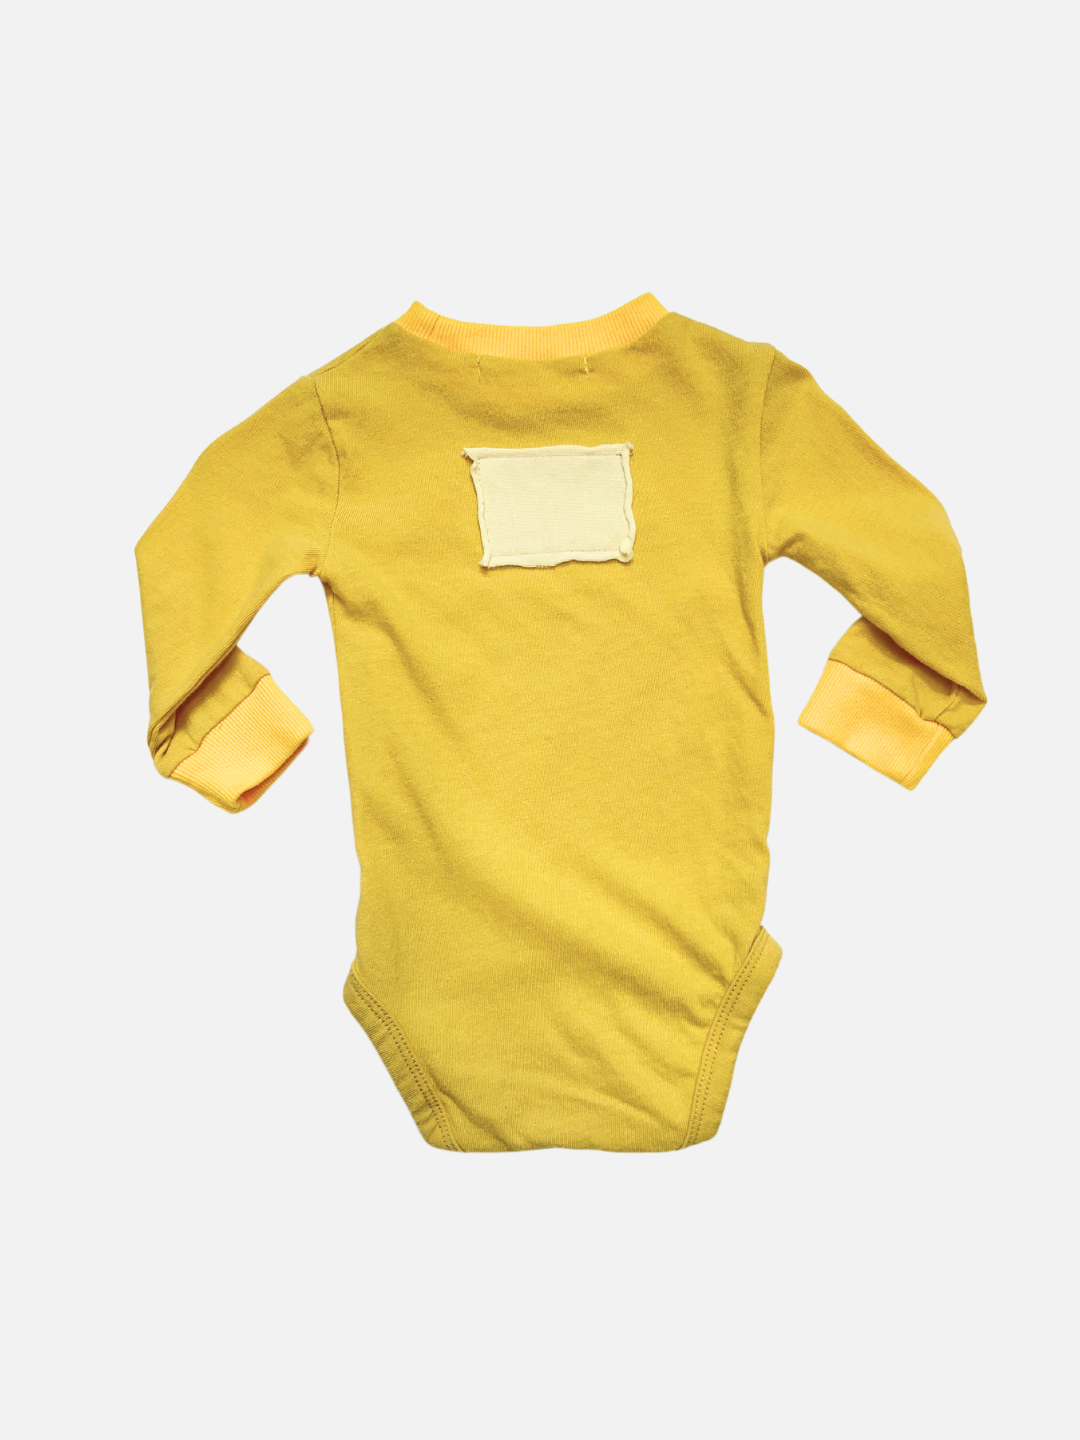 A back view of the baby patch onesie in yellow with ivory rectangular patch on the back